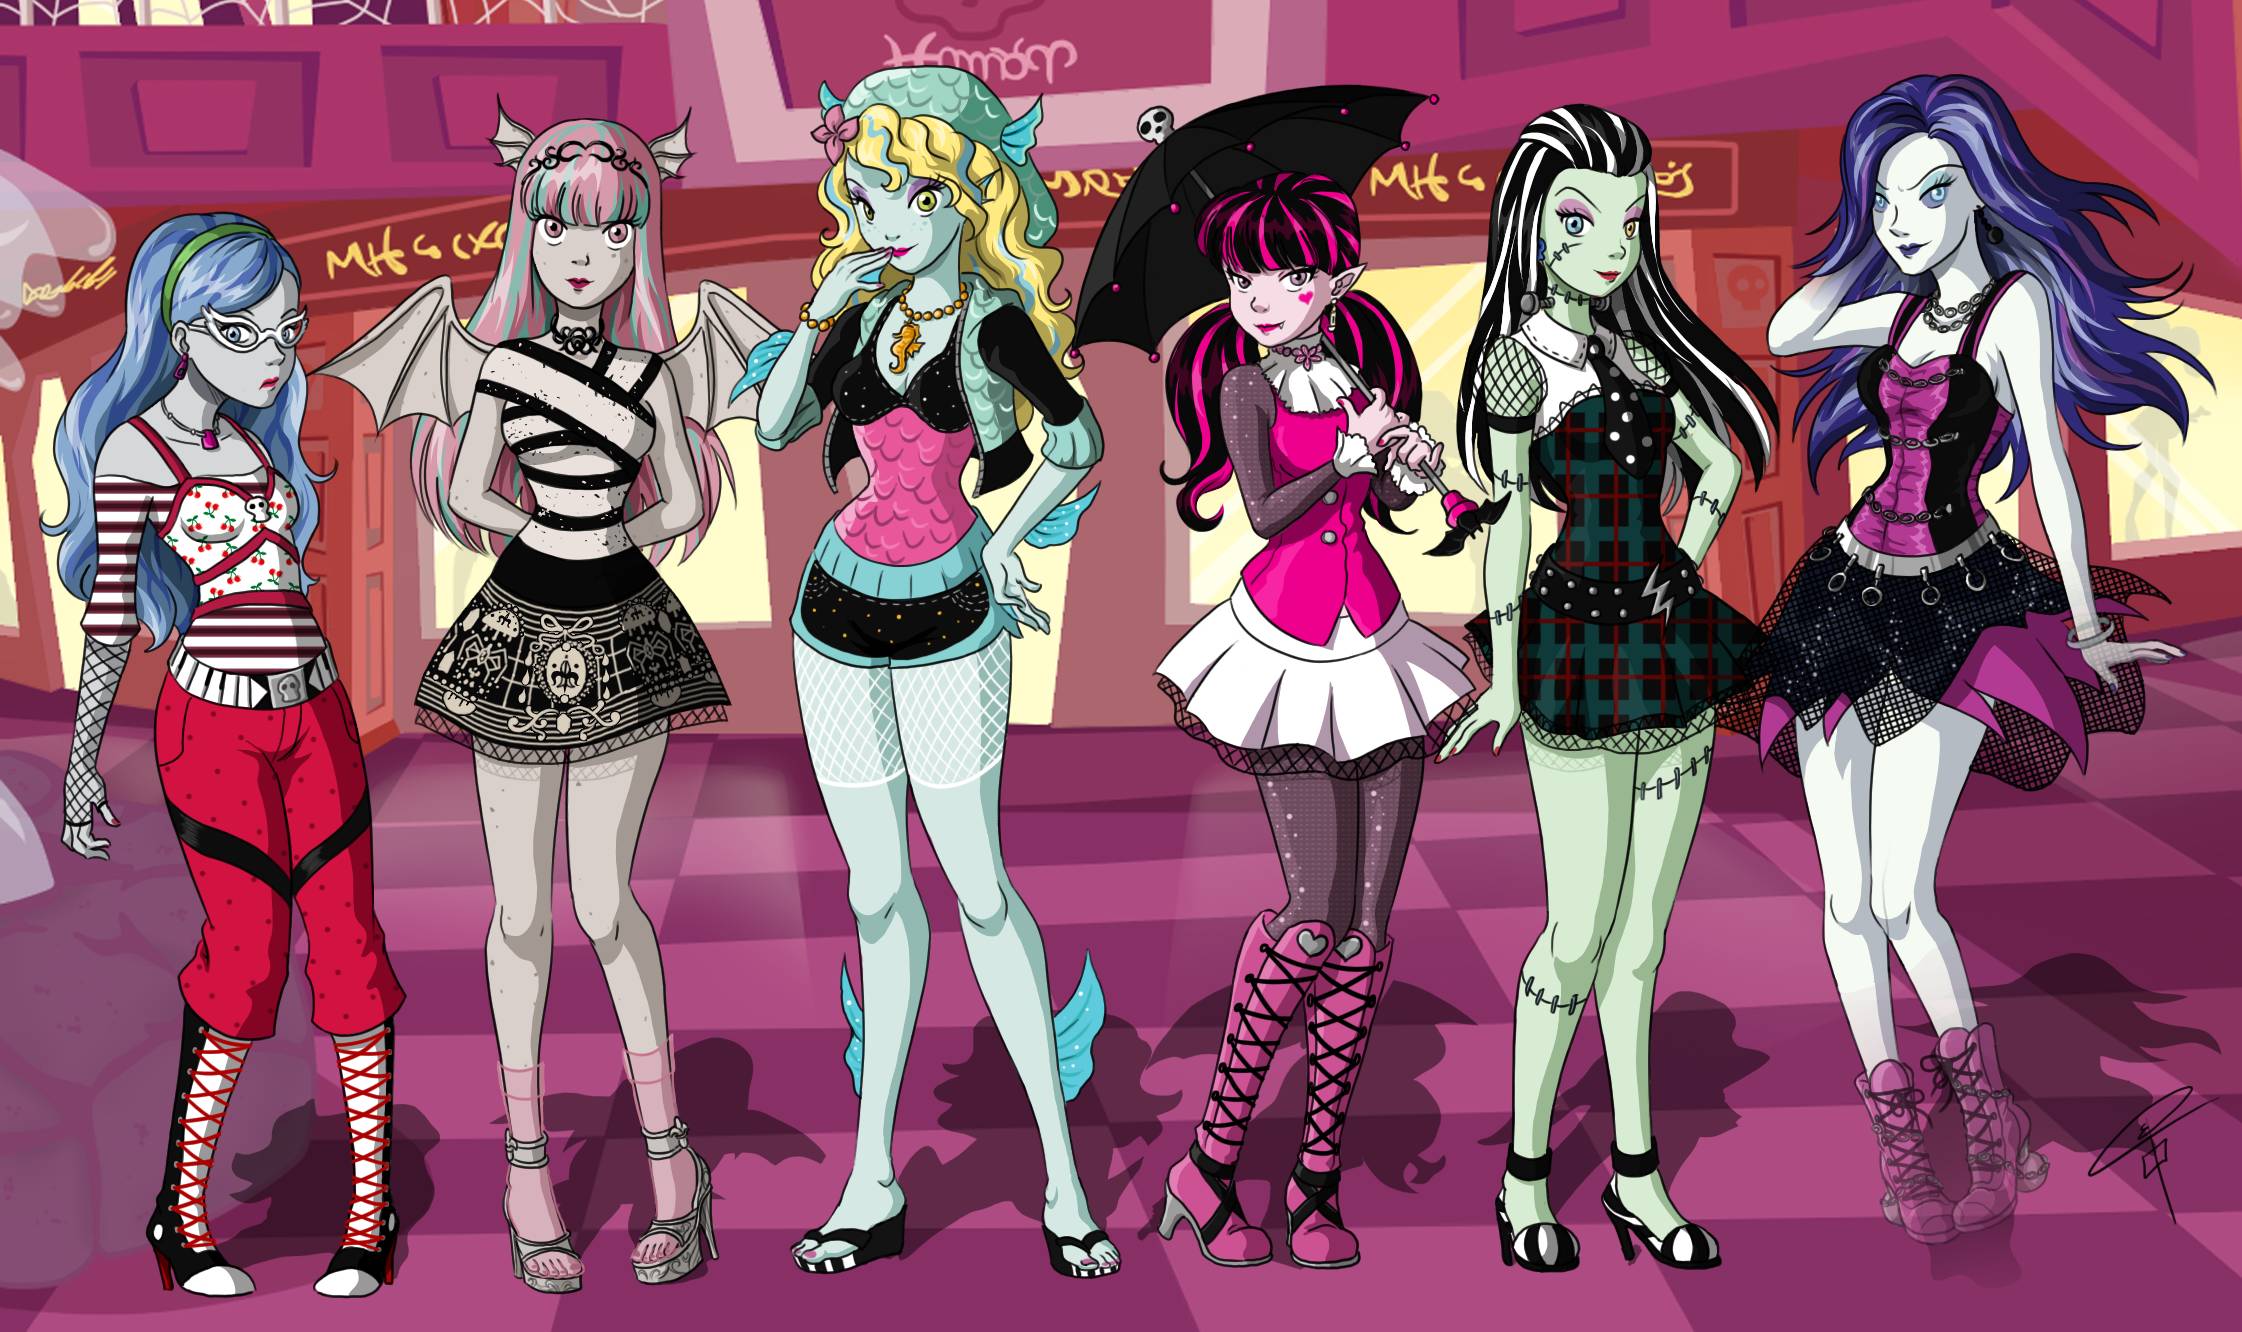 Wallpaper ID 413436  Products Monster High Ghouls Rule Phone Wallpaper   1080x1920 free download